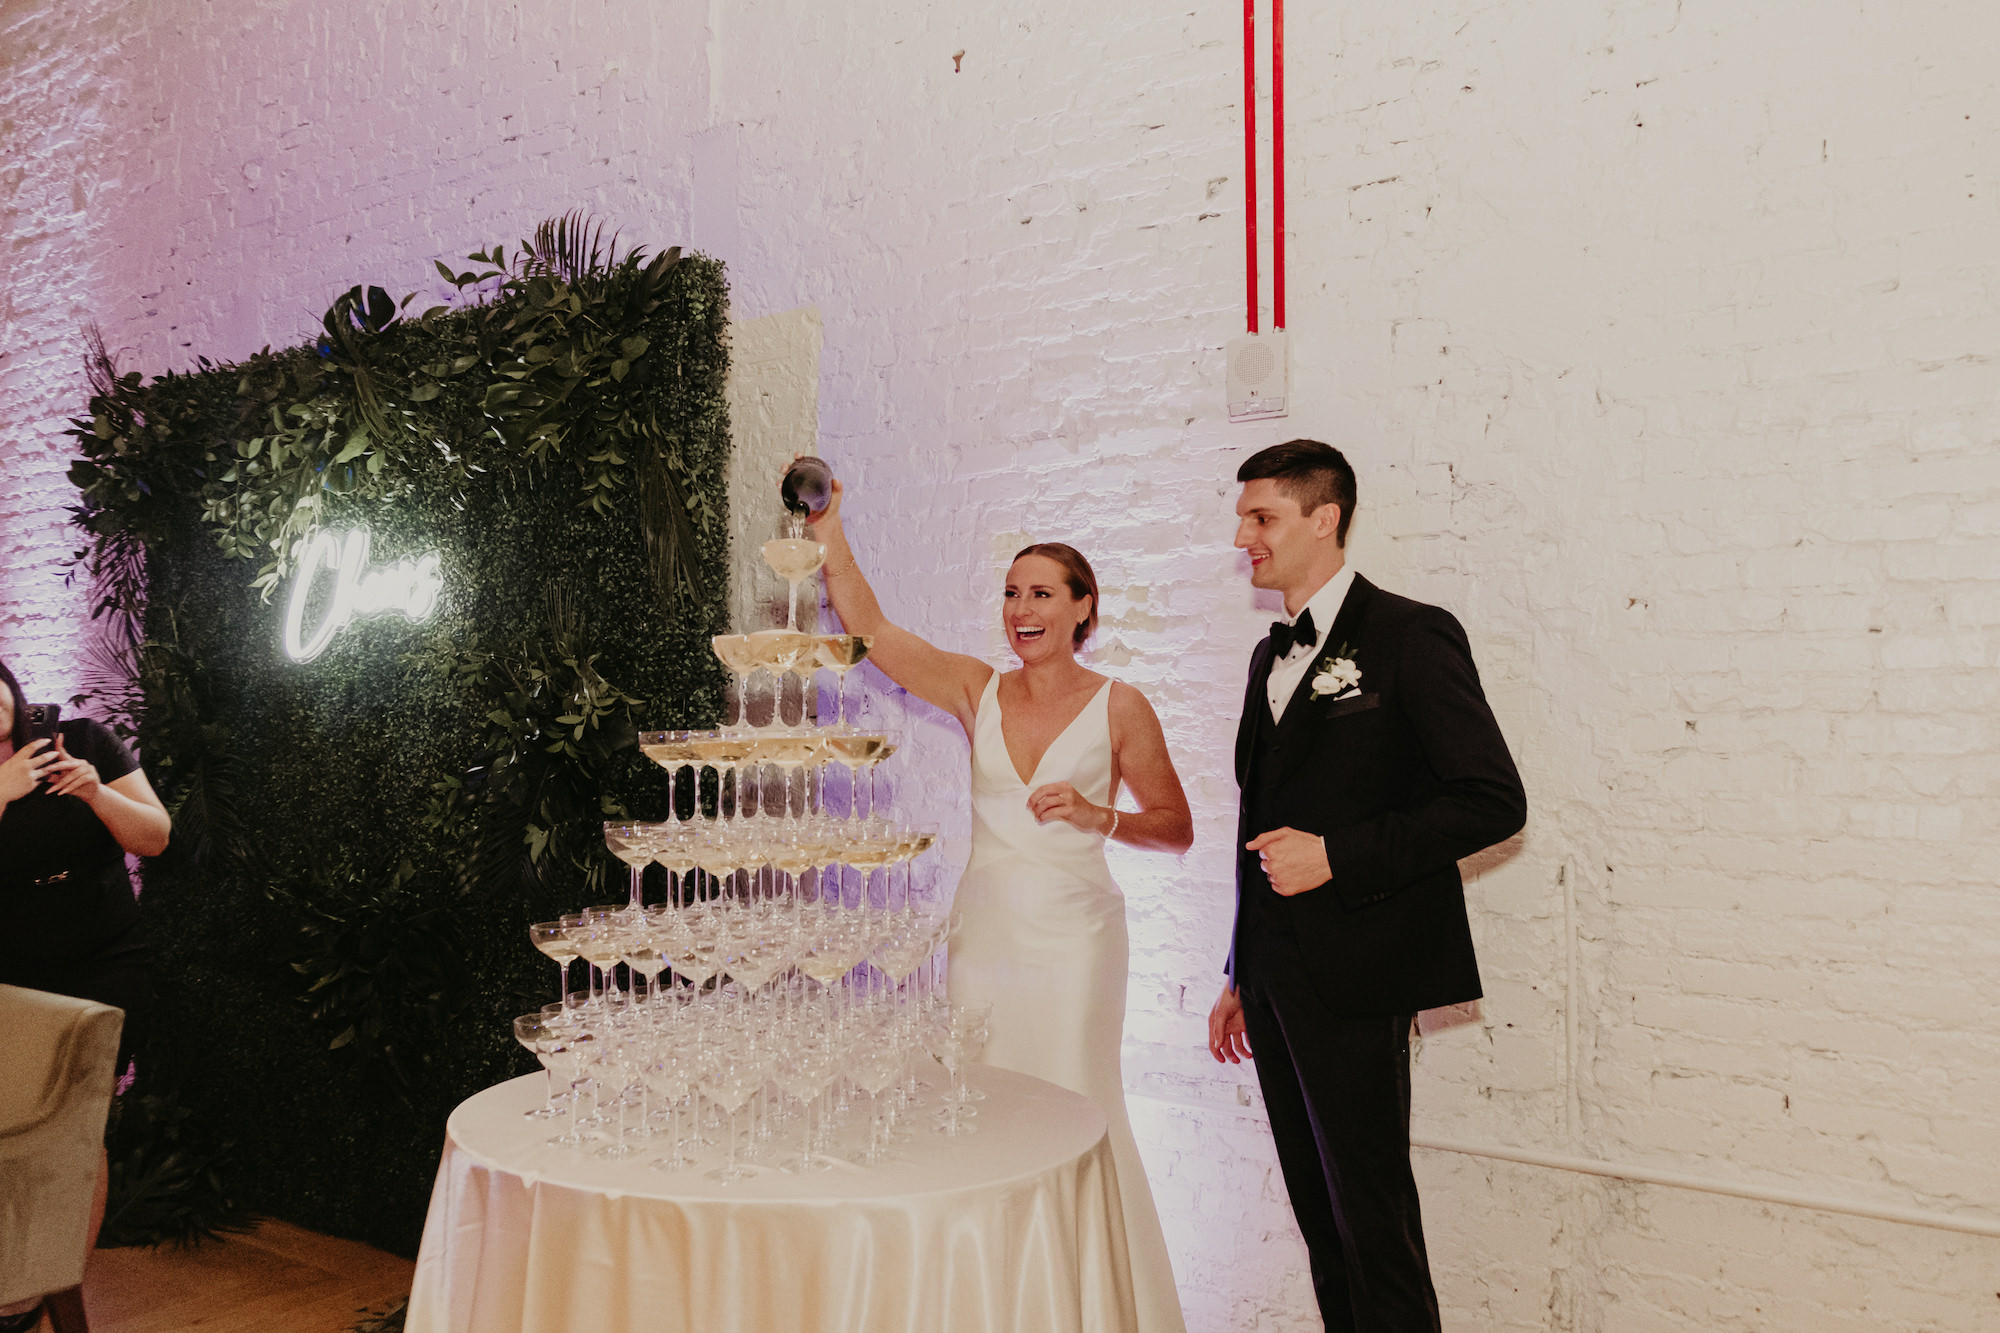 Bride Pouring Champagne Tower at Wedding Reception